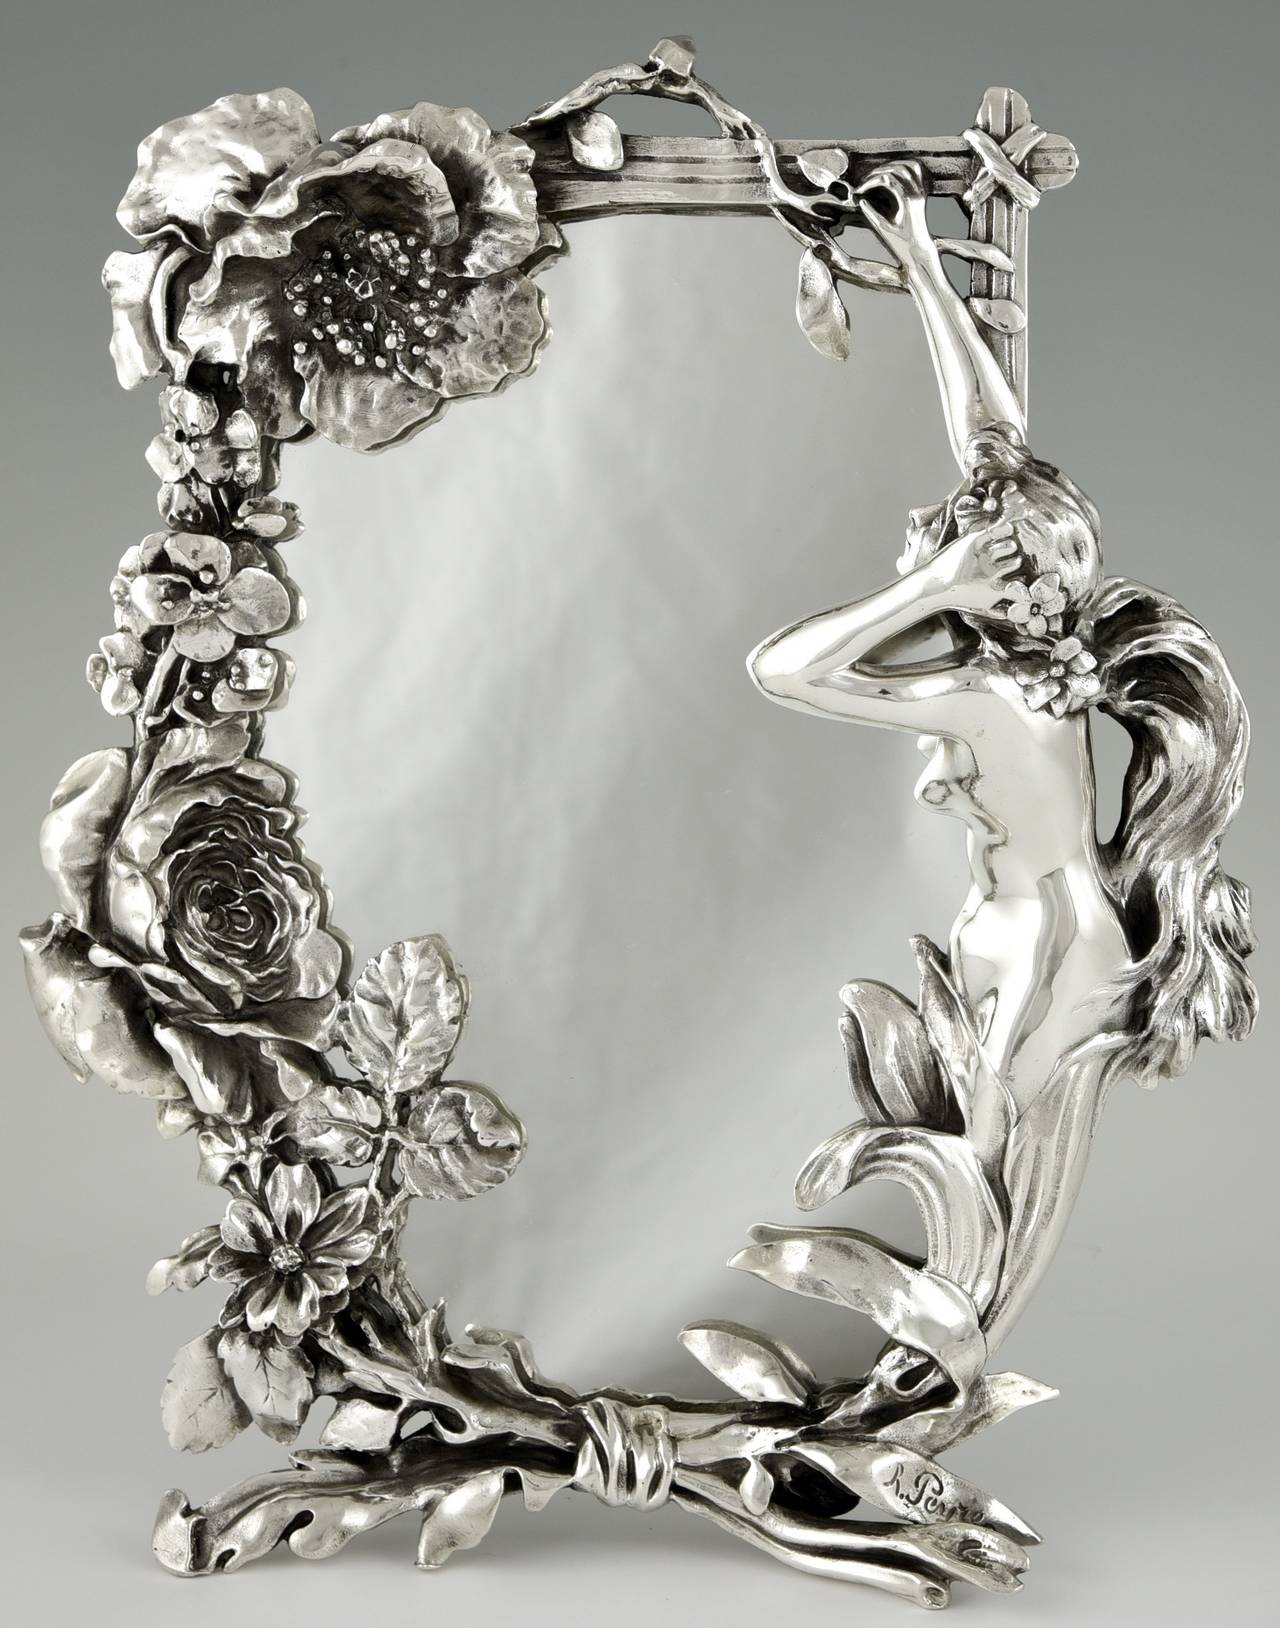 Description:  Art Nouveau silvered table mirror with a lady picking flowers to put in her hair. The frame decorated with flowers. 
Artist/ Maker:  Peyre, Raphael- Charles.  France, 1872-1949.
Signature/ Marks:  Peyre.
Style:  Art Nouveau.